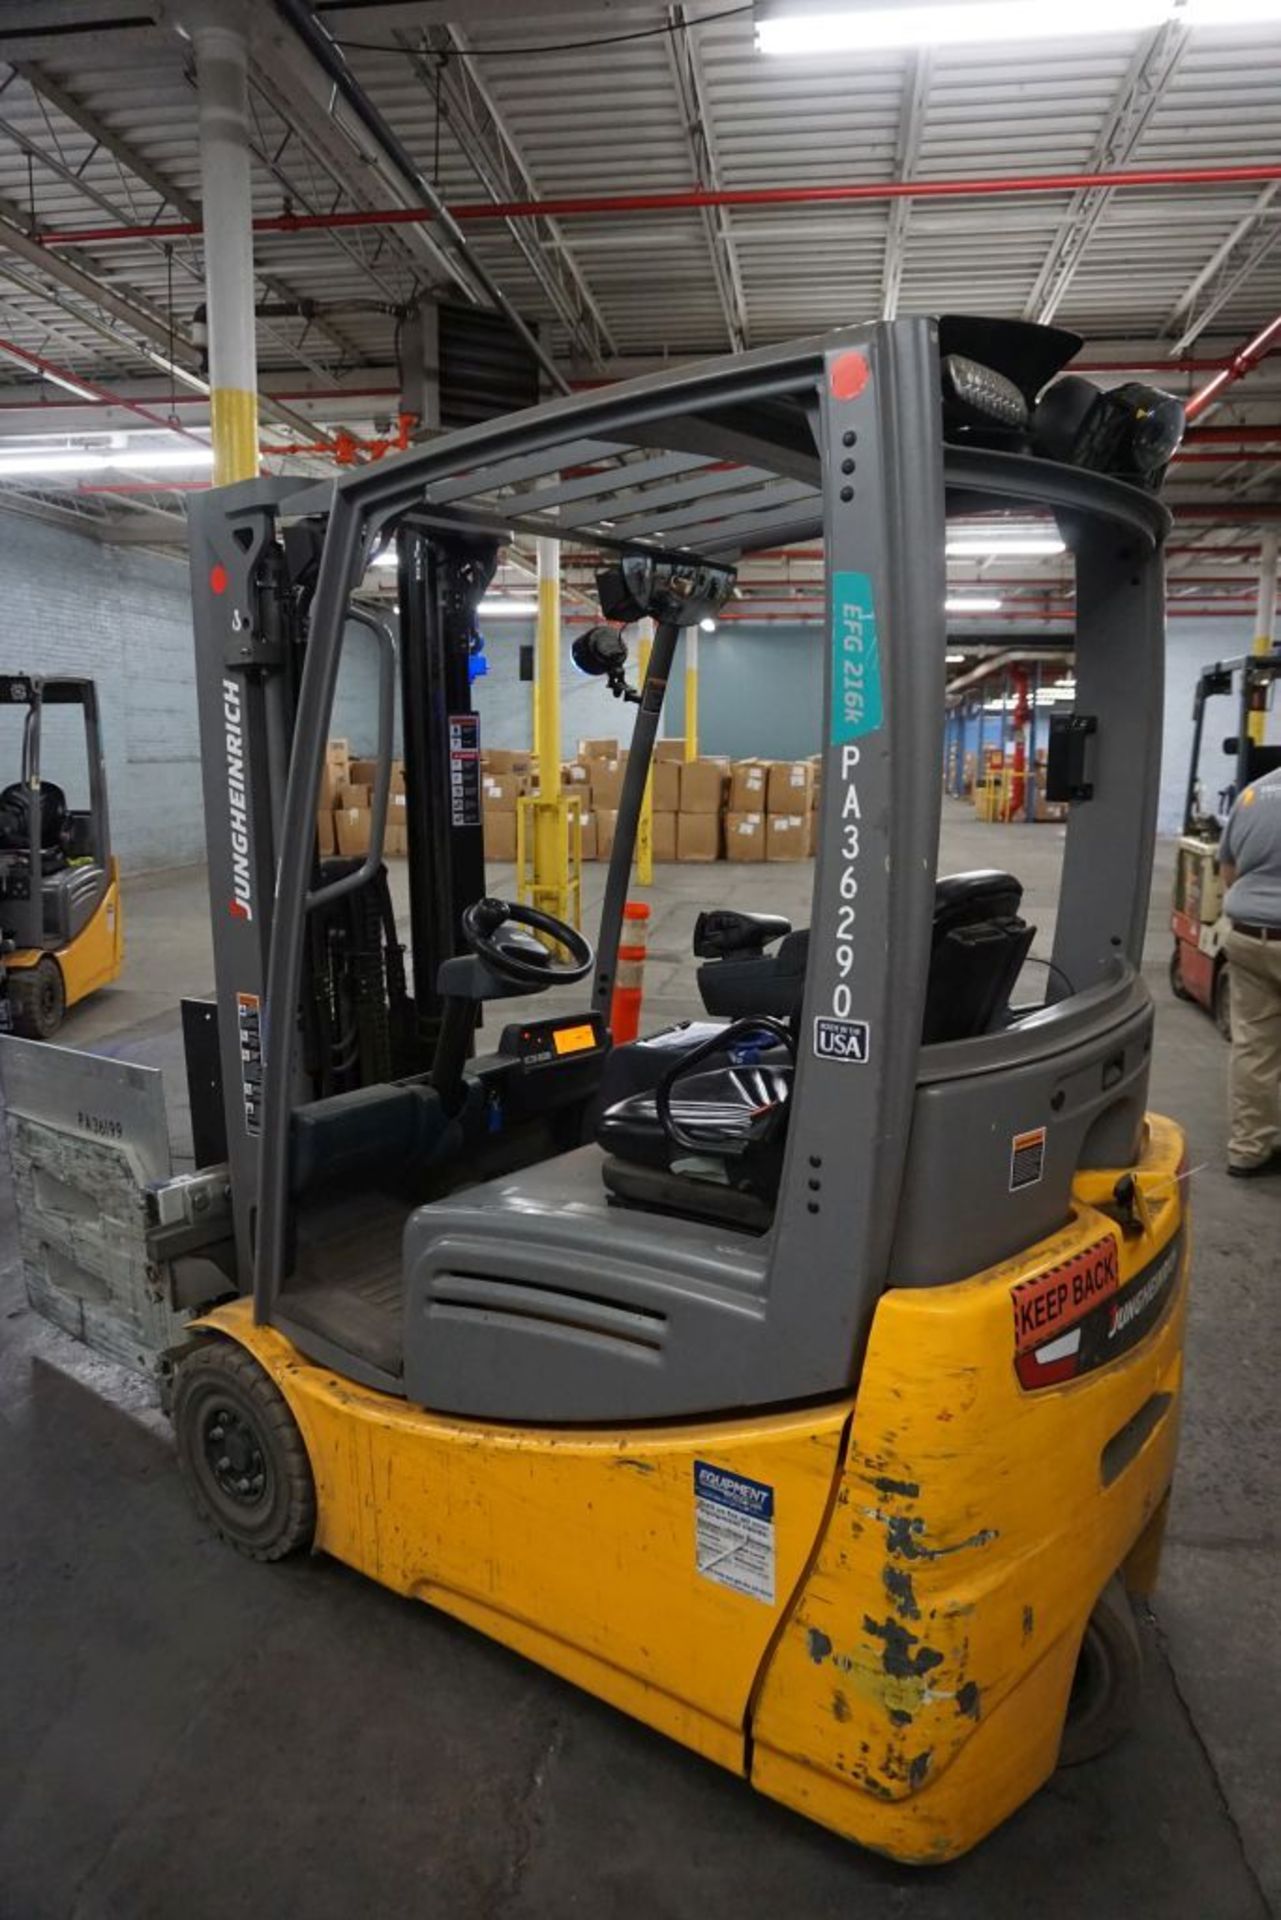 2016 Jungheinrich 48V Electric Forklift | 3,100 lb Capacity; 122" Lift; *Delayed Removal* - Image 6 of 18